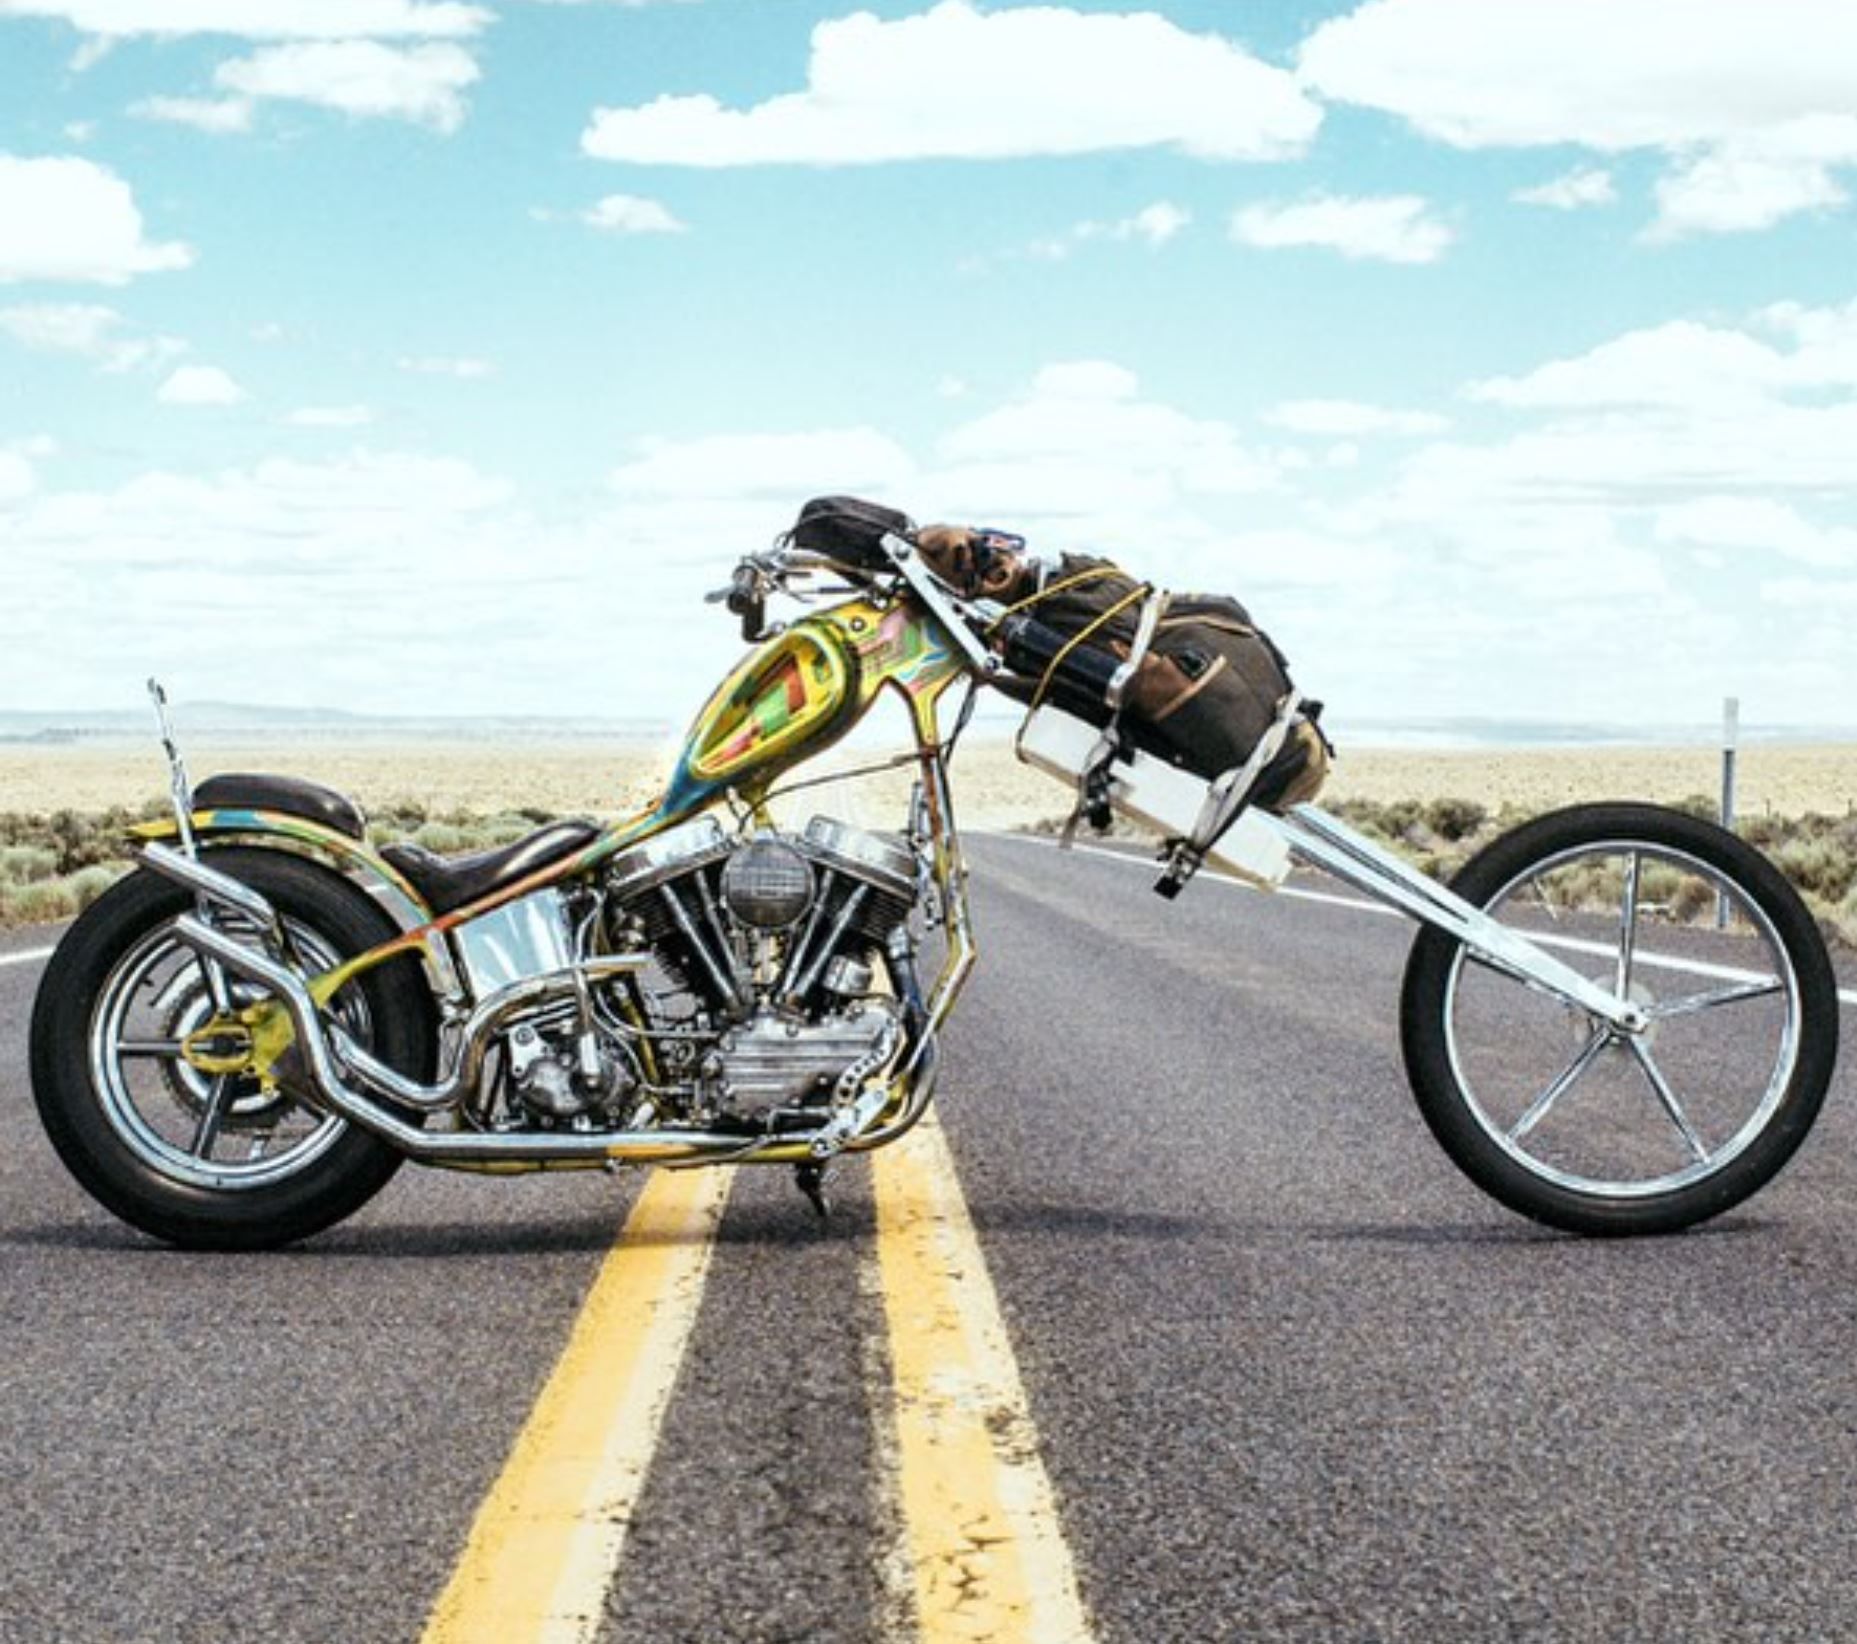 This is the most ridiculous Harley Davidson Chopper we have ever seen